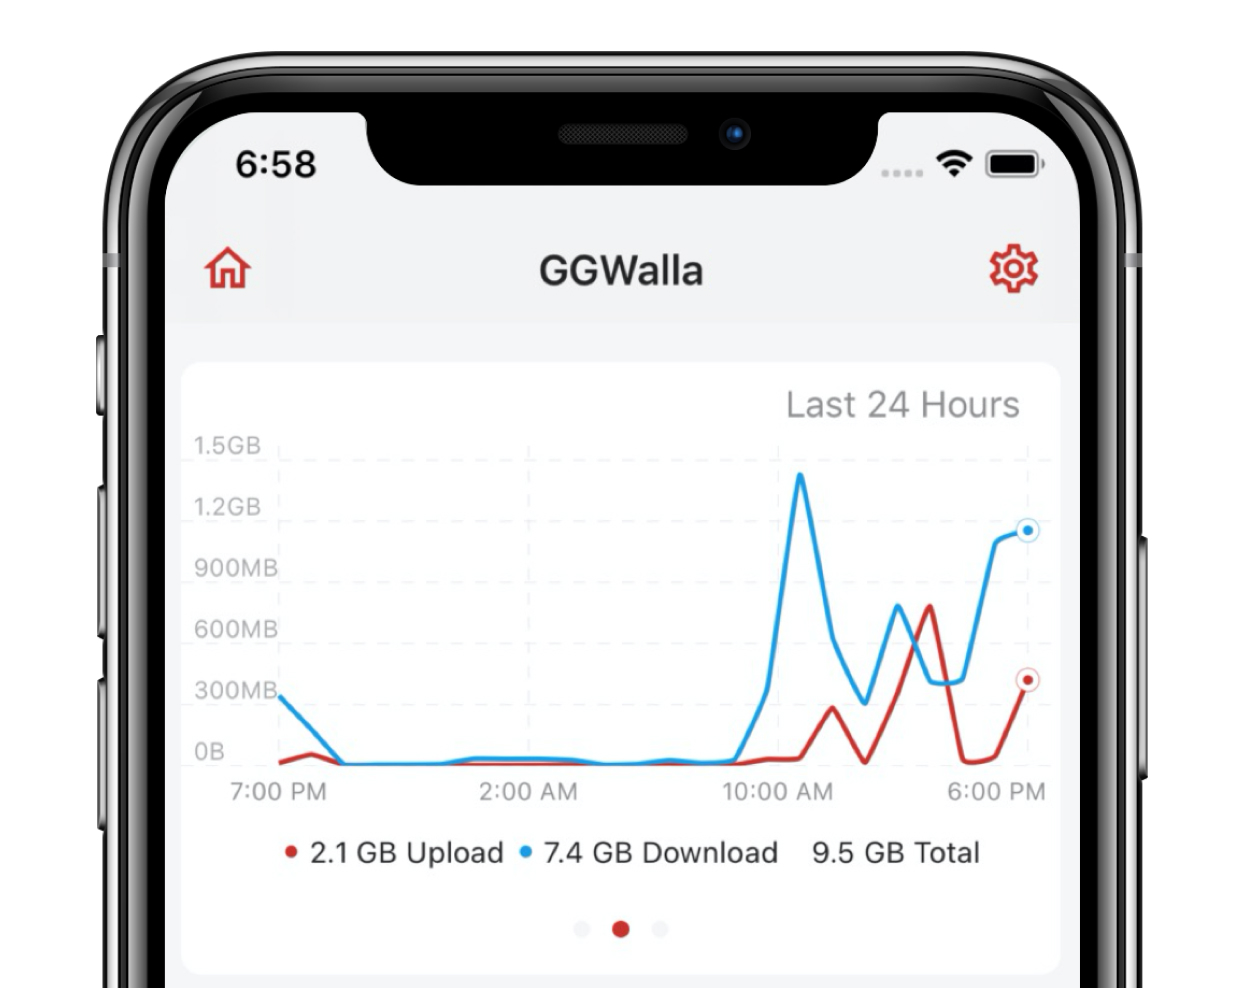 Get started with firewalla and learn more about the top graph